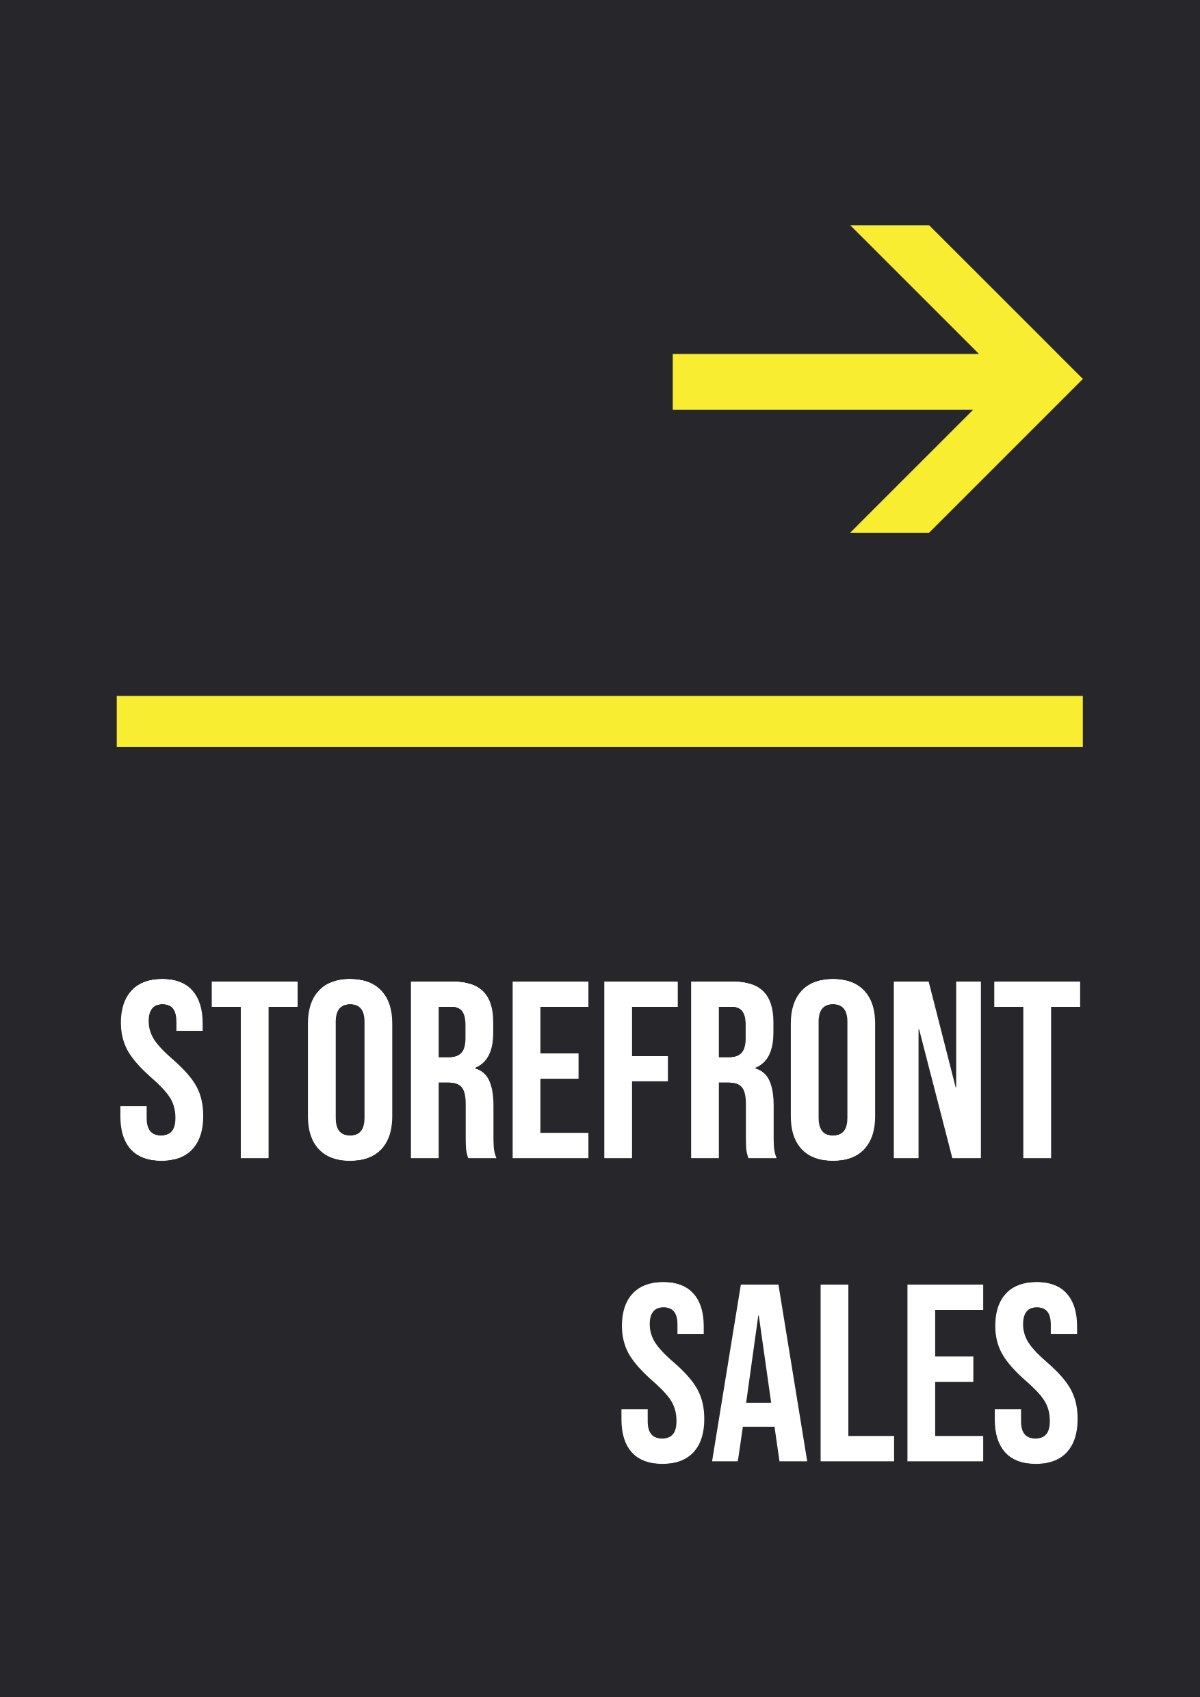 Free Storefront Sales Signage Template